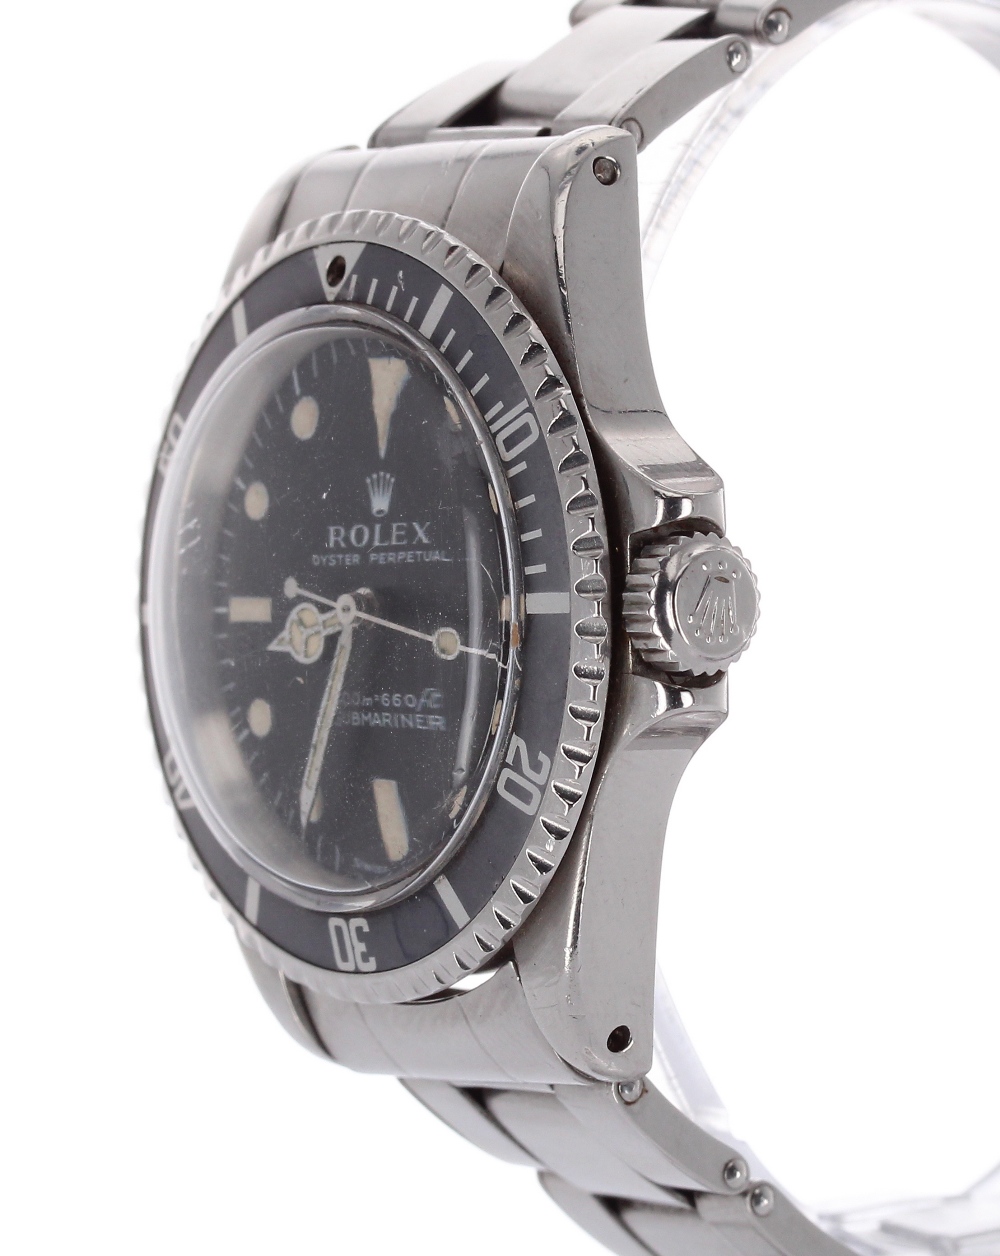 Rolex Oyster Perpetual Submariner (metres first) stainless steel gentleman's bracelet watch, ref. - Image 3 of 12